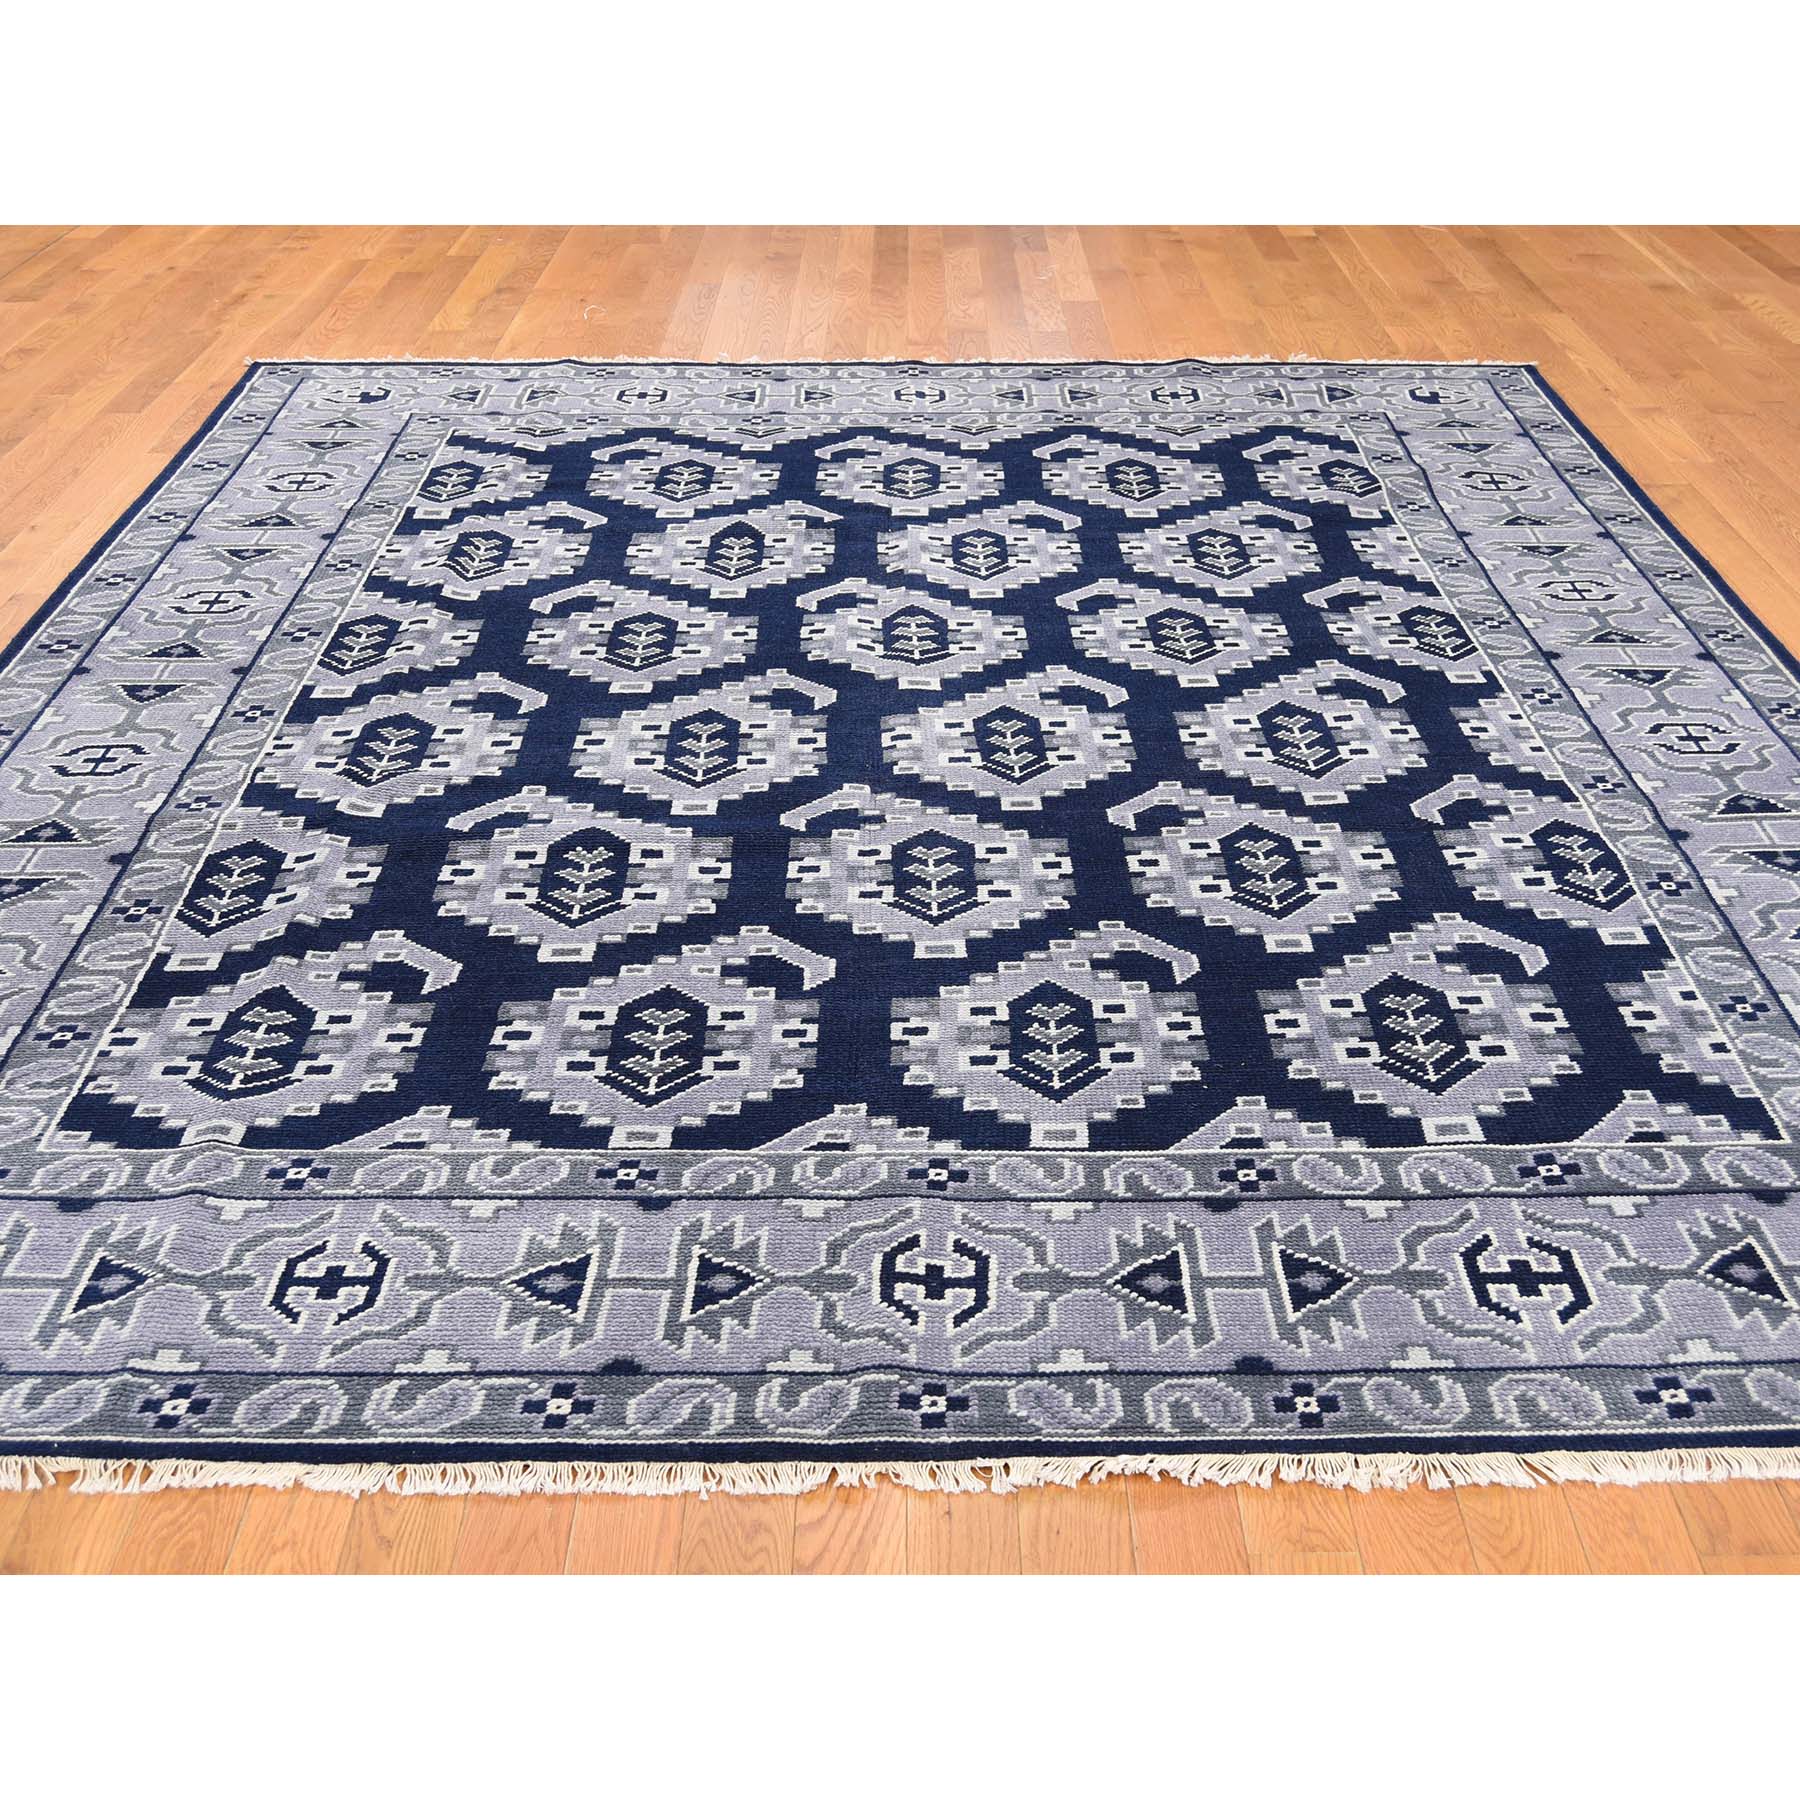 8-1--x9-10-- Hand-Knotted Turkish Knot Boteh Design Pure Wool Rug 